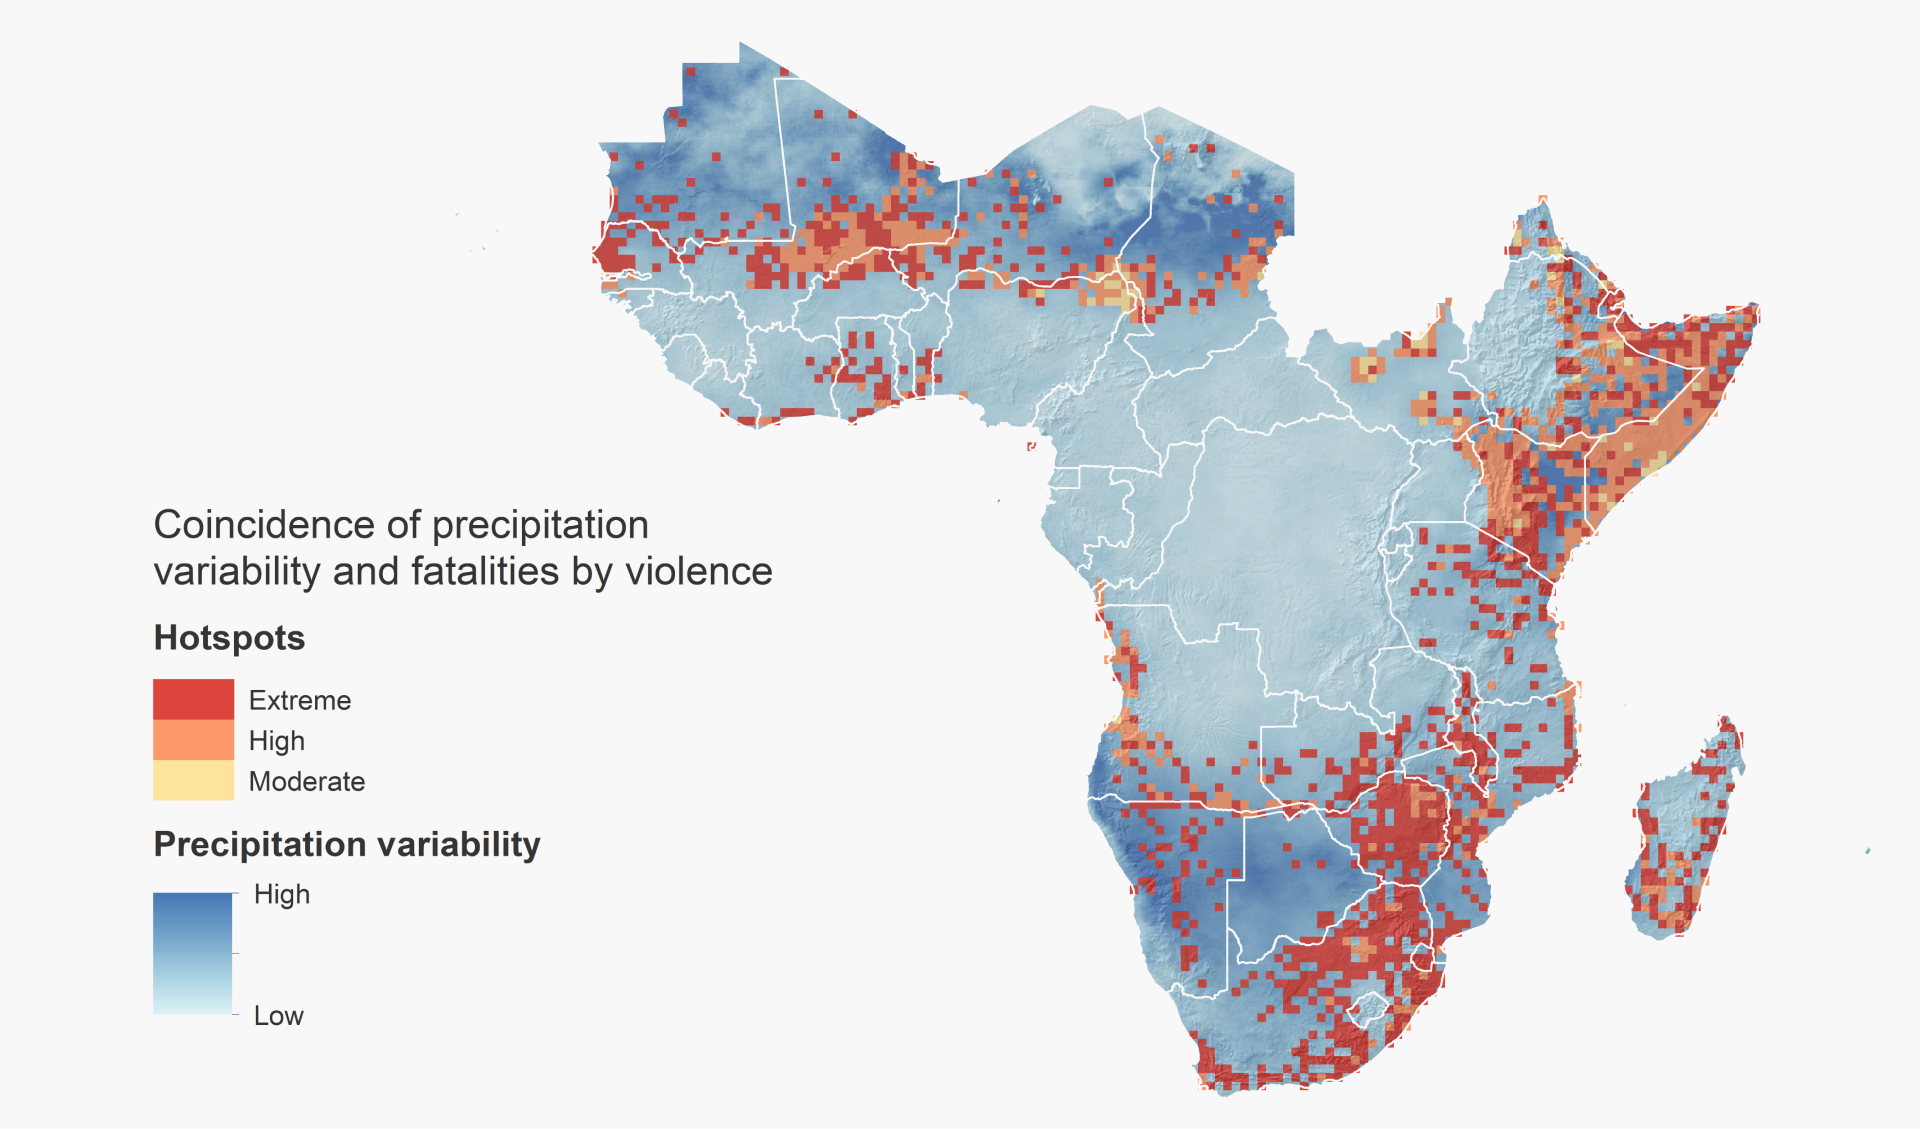 Data Insight 4, Map 1: Coincidence of precipitation variability and fatalities by violence